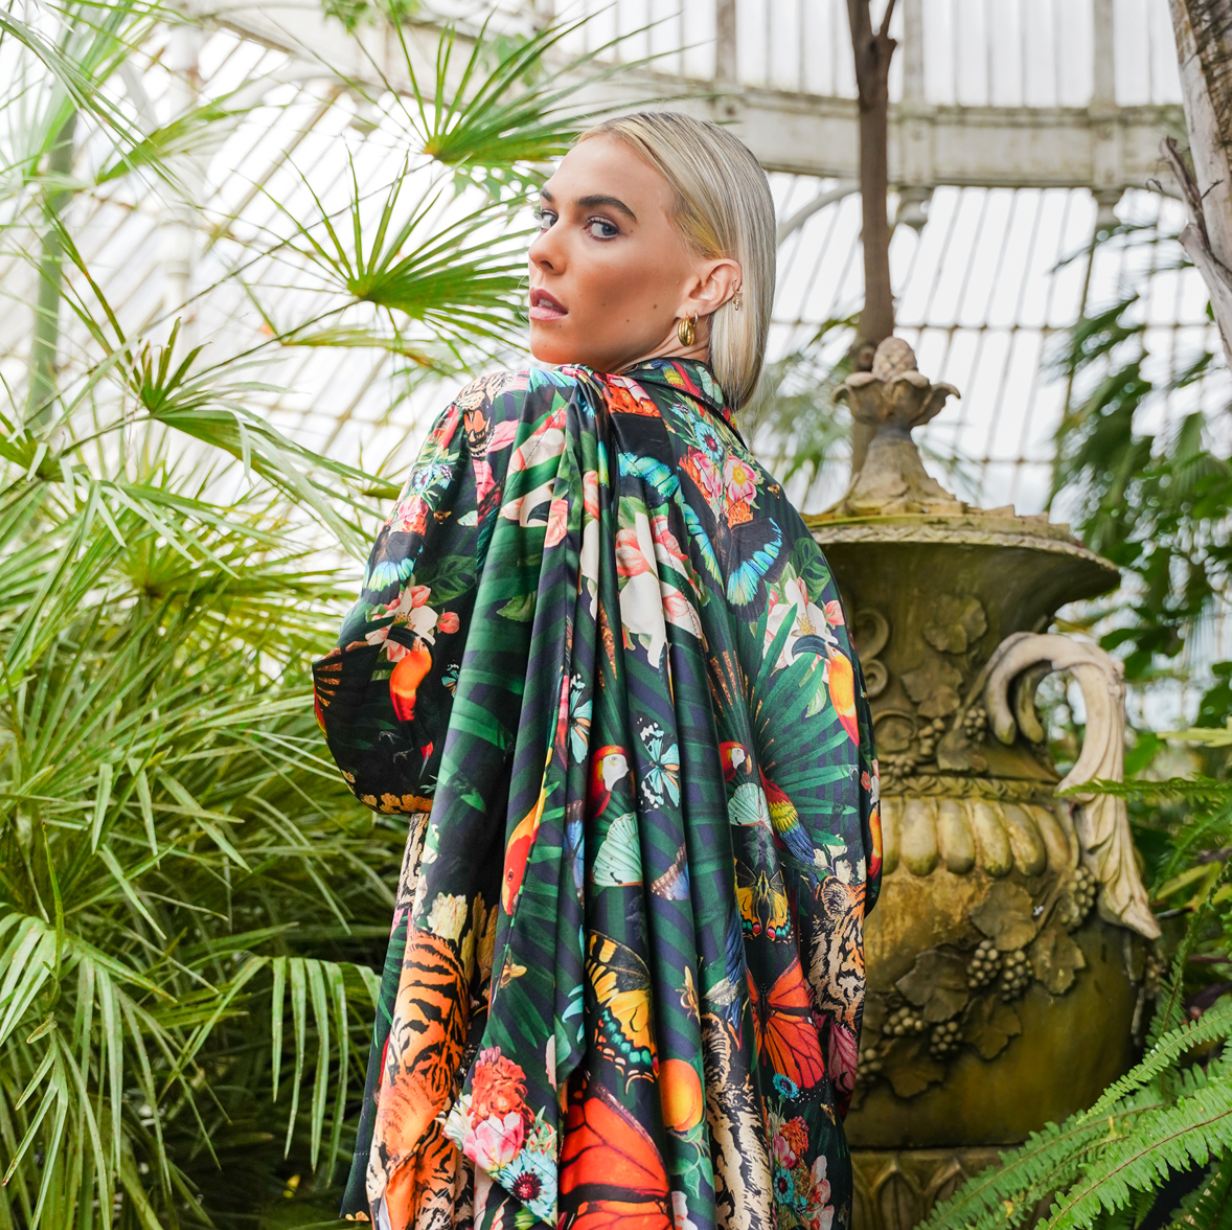 A female model with luxury 100% silk Kimono draped over her shoulder in a maximalist tropical inspired design against a dark background